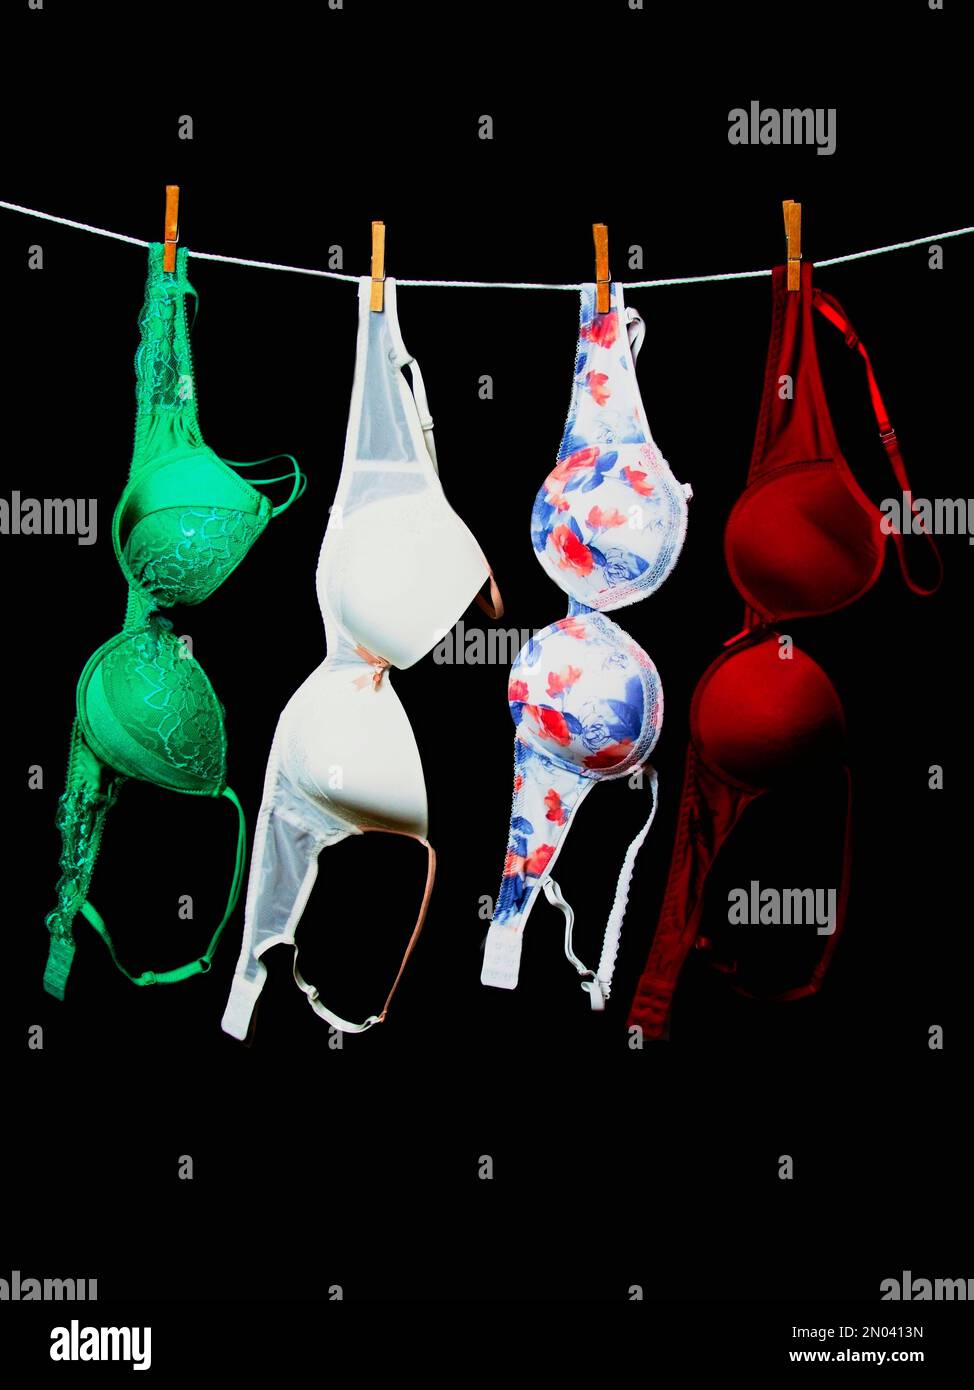 Colorful women's bras on a string and a black background Stock Photo - Alamy